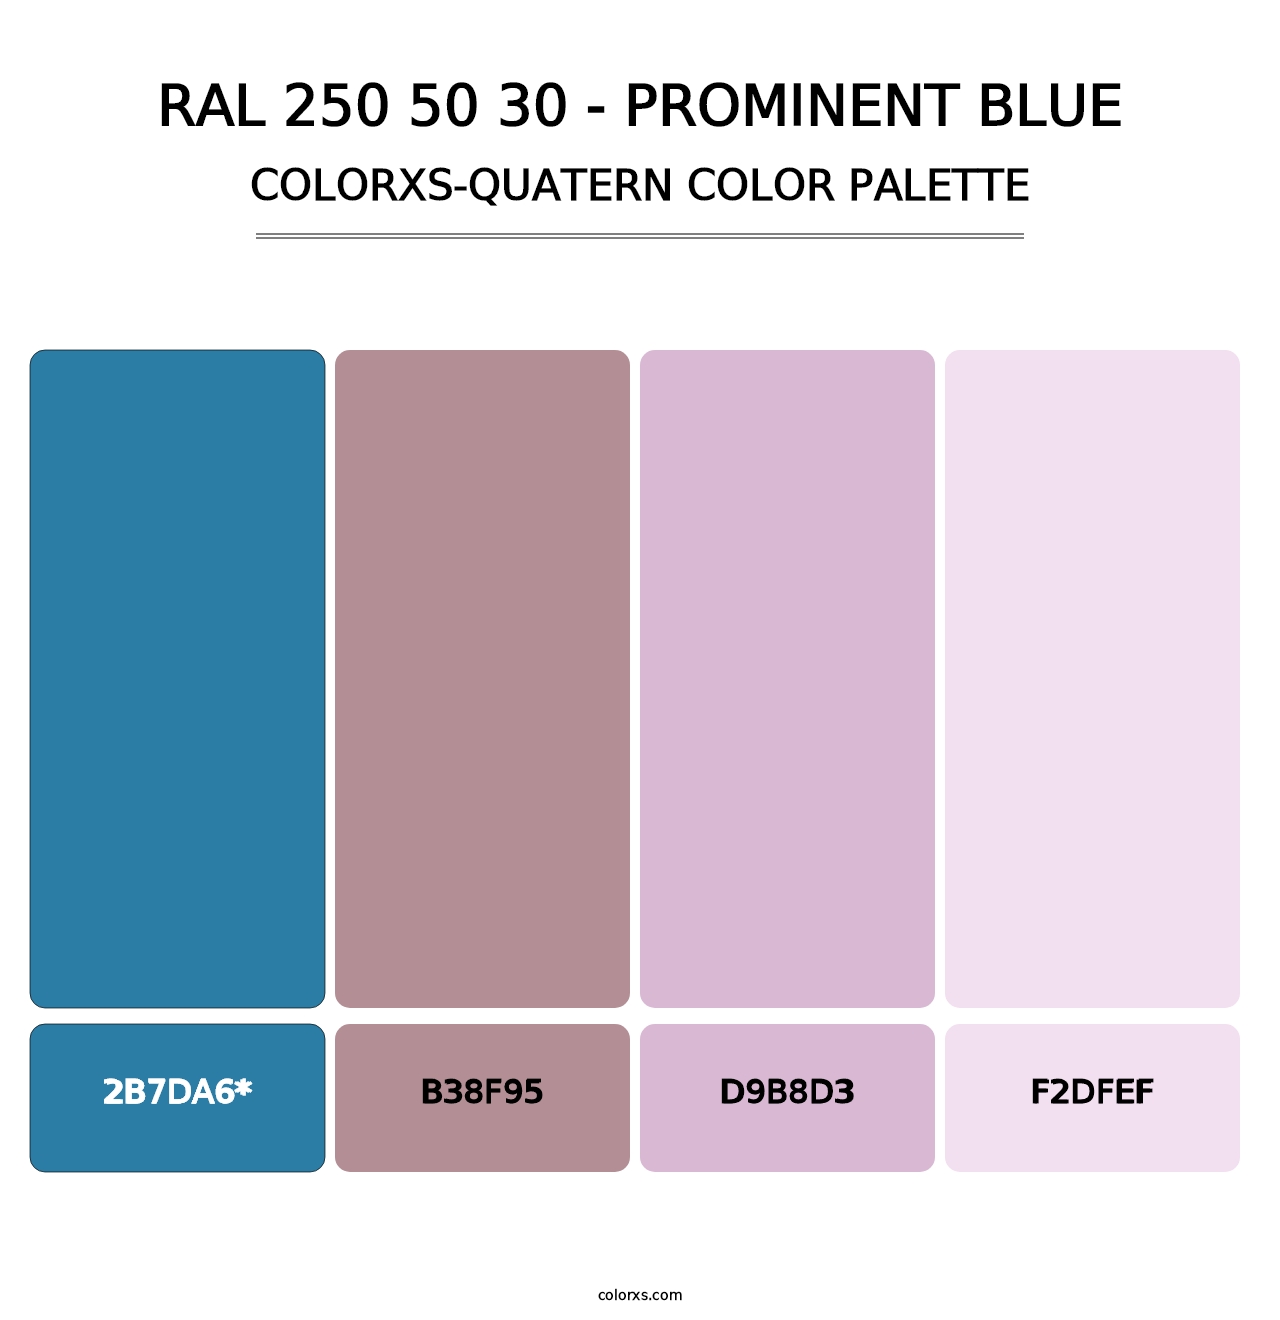 RAL 250 50 30 - Prominent Blue - Colorxs Quatern Palette